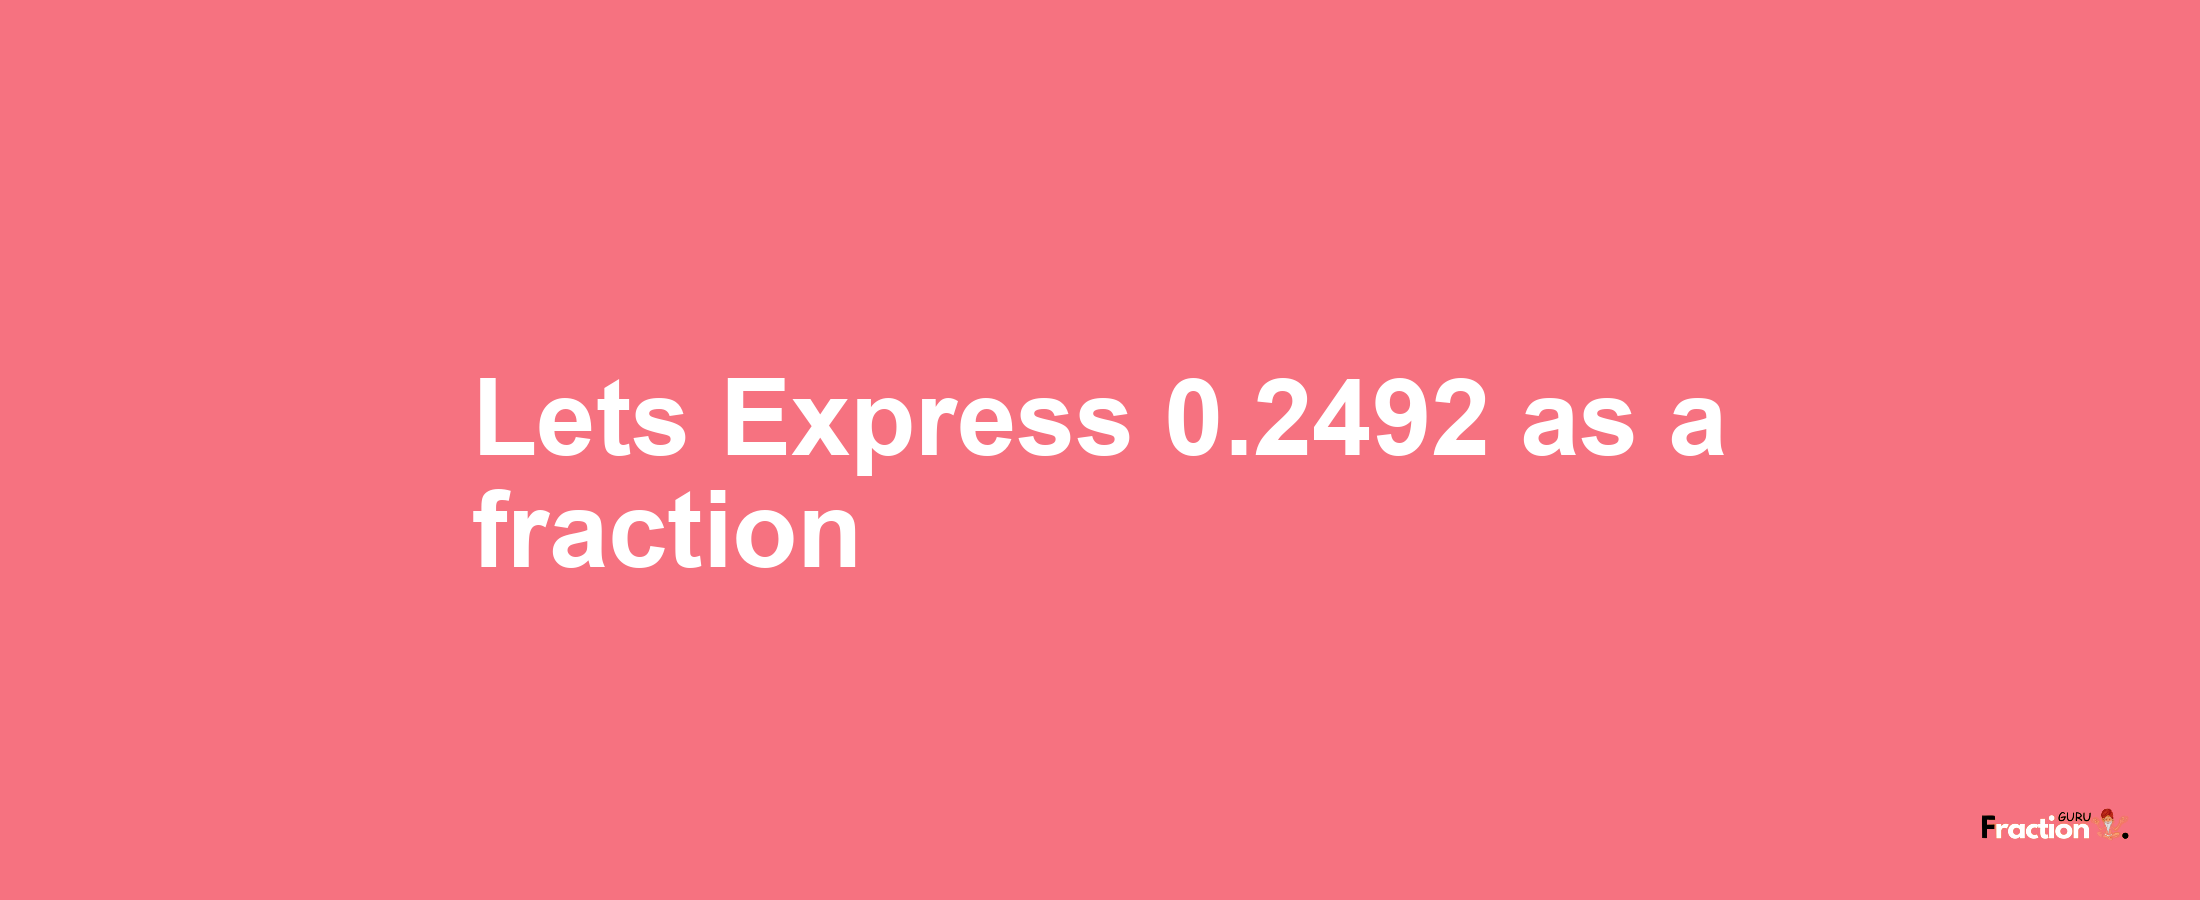 Lets Express 0.2492 as afraction